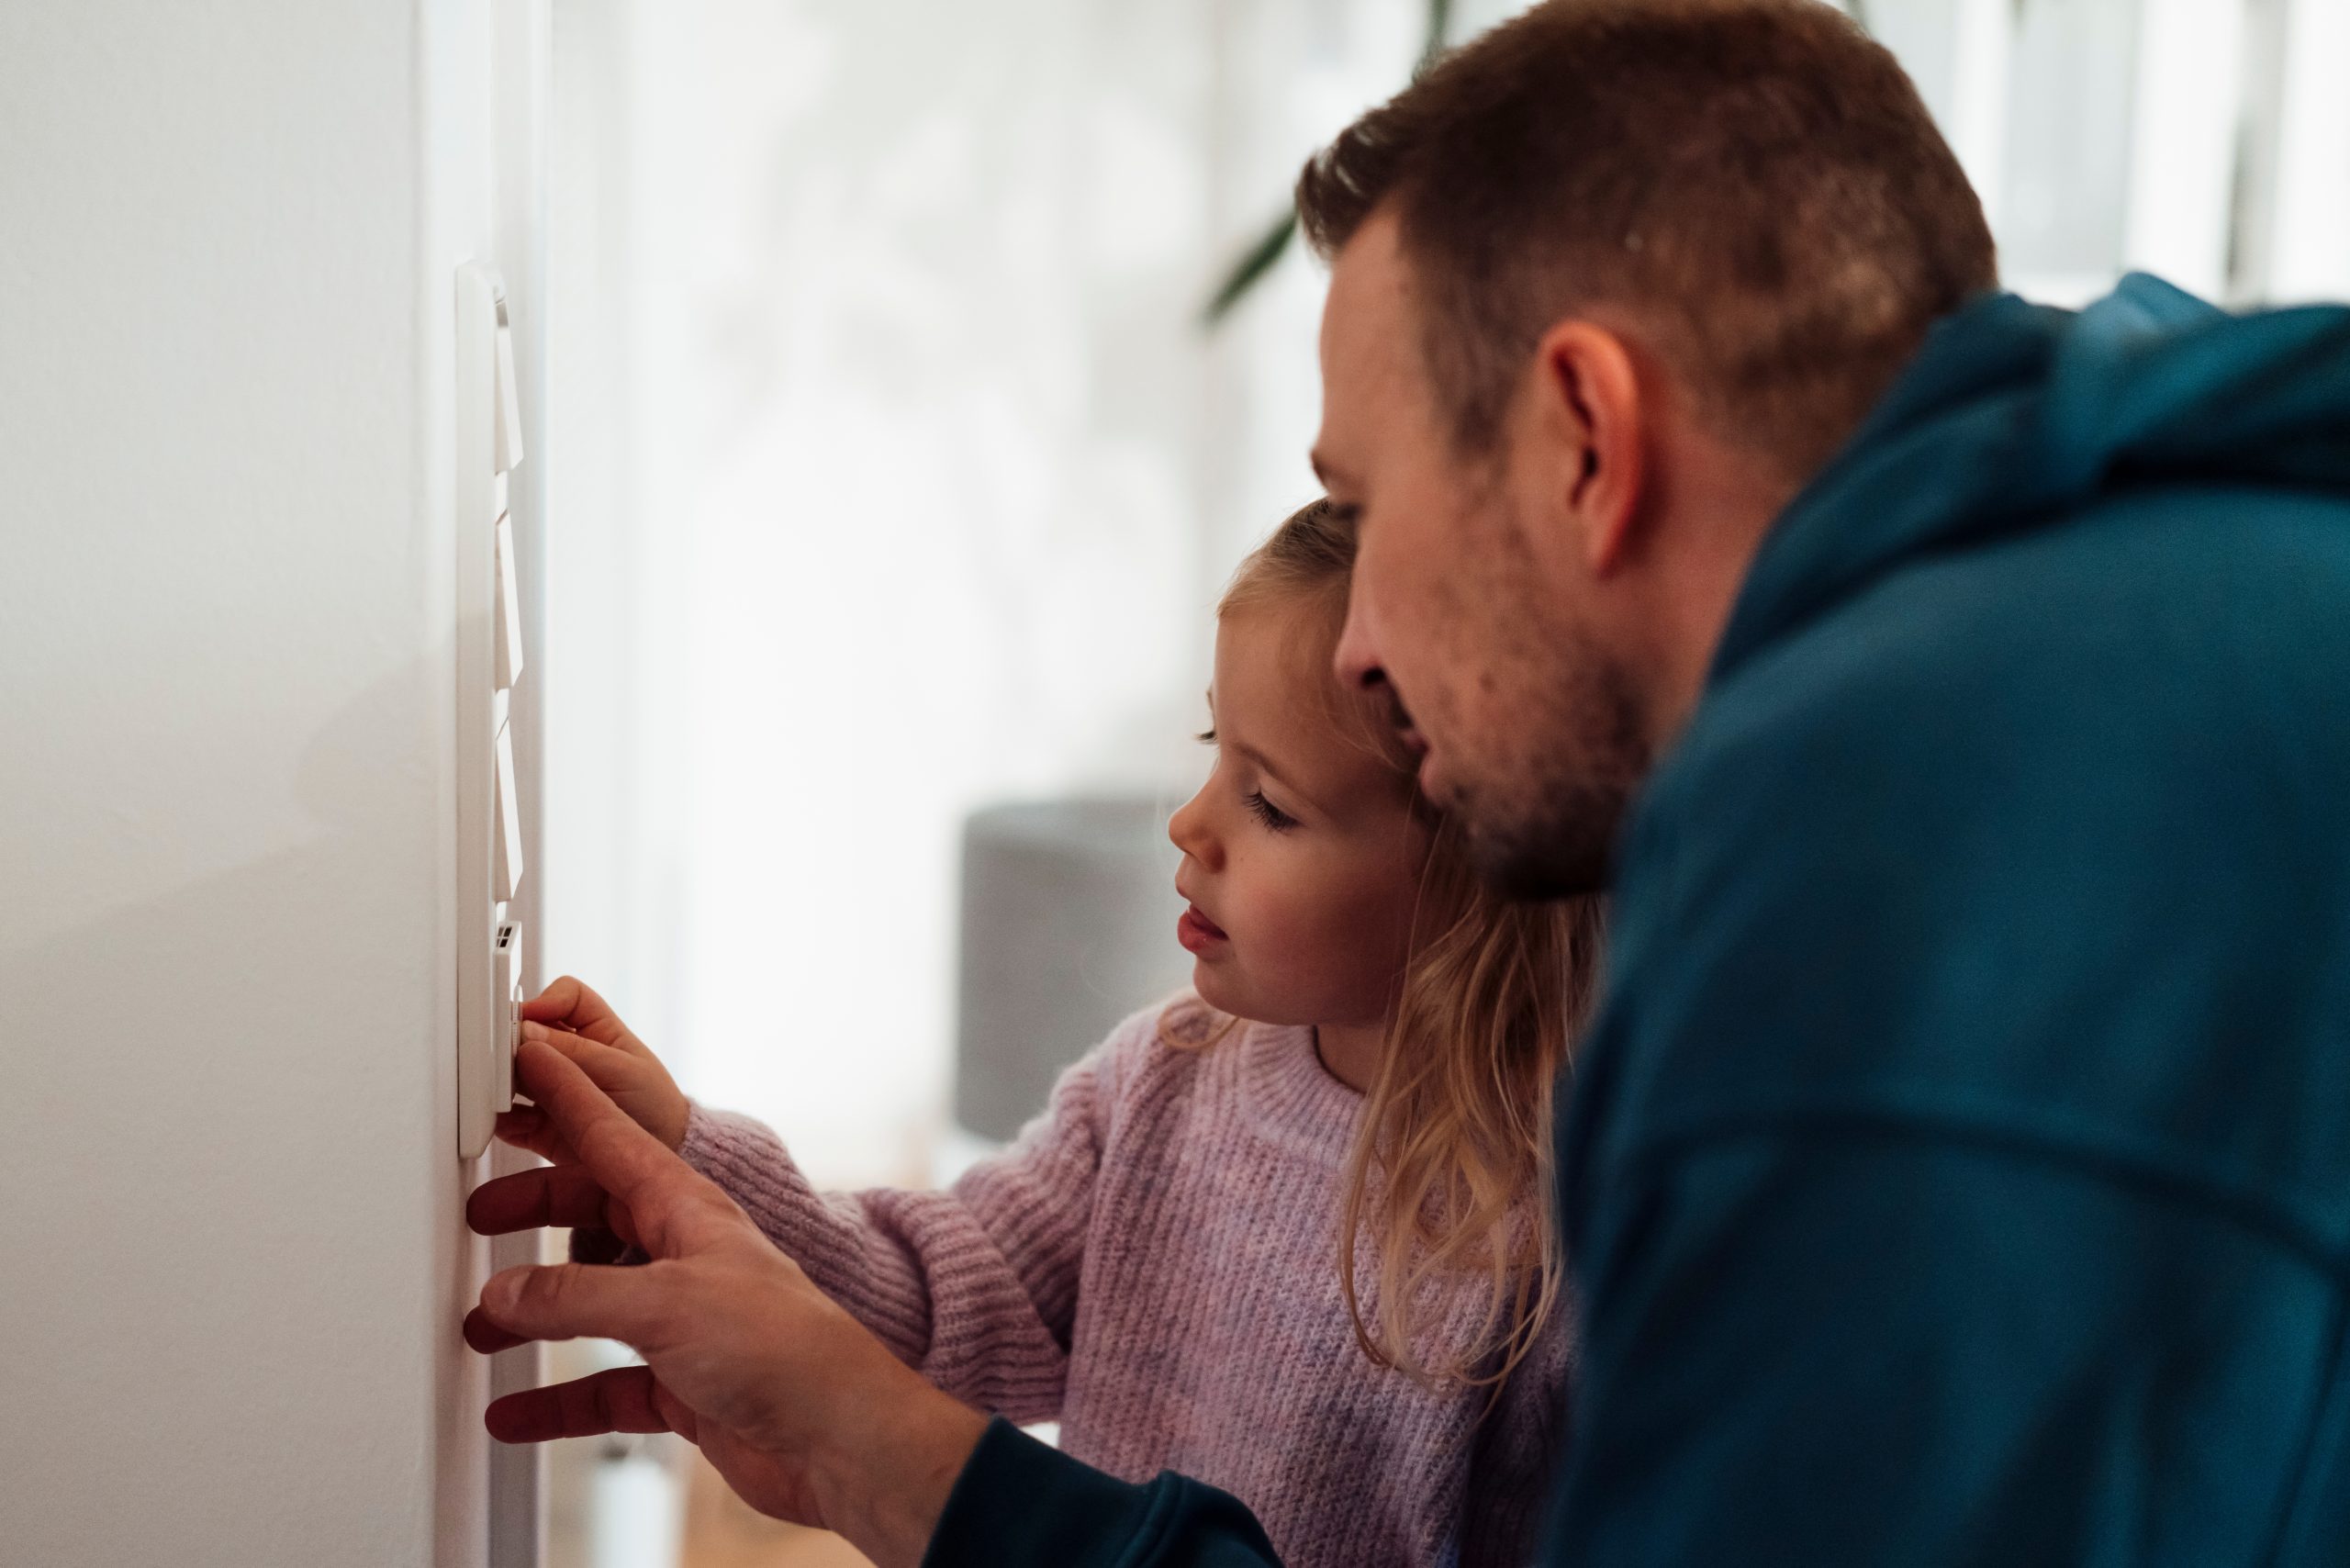 Girl,And,Father,Adjusting,Temperature,On,Thermostat,At,Home